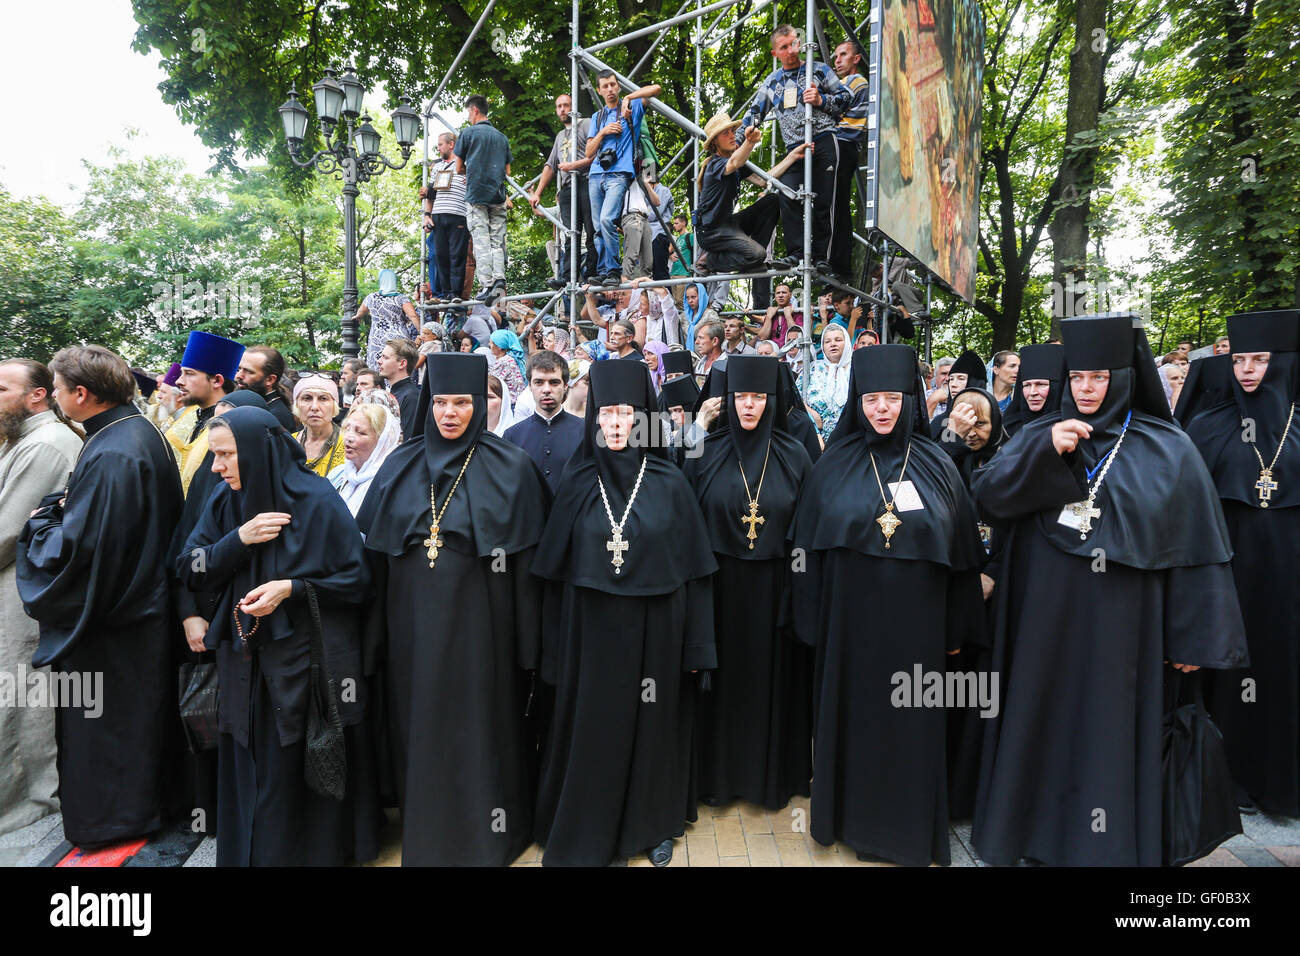 Ukrainian orthodox believers, priests, monks attend a religion march organized by the Ukrainian Orthodox Church of the Moscow Patriarchate in Kyiv, Ukraine, 27 July 2016. Sacred processions of Moscow Patriarchate believers started earlier, in July 4 2016 and timed to the Day of the Christianization of Kyiv Rus and 1000 years of ancient monks on the Holy Mount Athos. On July 27 believers who have begun a course from Svyatogorsk Monastery in eastern Ukraine and from Pochayiv Monastery at the west of the country, met at the European Square in Kyiv. The main celebrations took place at Vladimir's Stock Photo